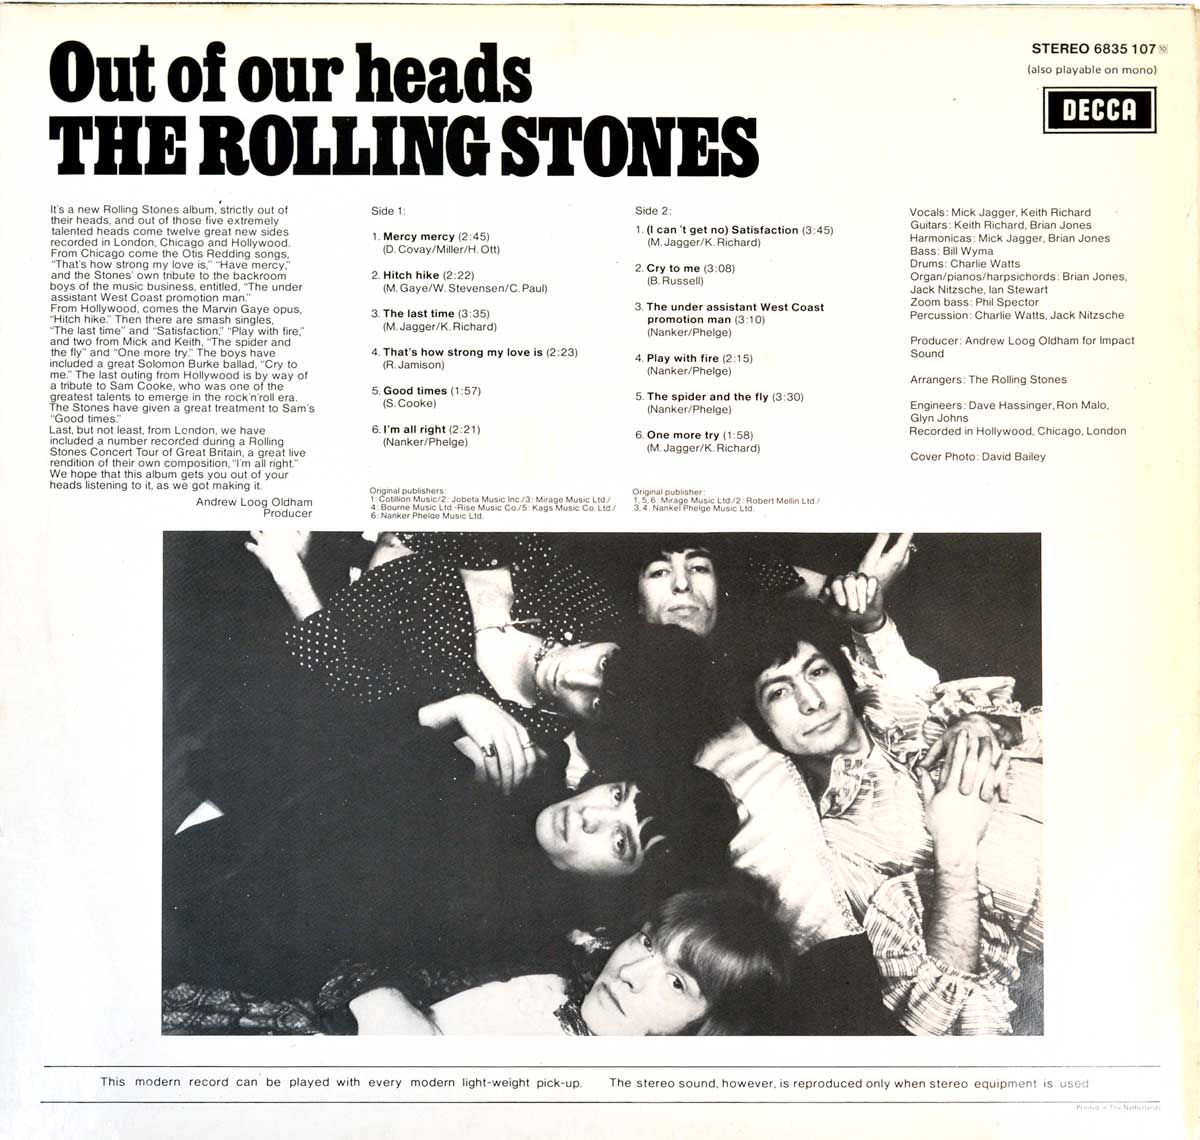 Album Back Cover  Photo of "THE ROLLING STONES – Out Of Our Heads"